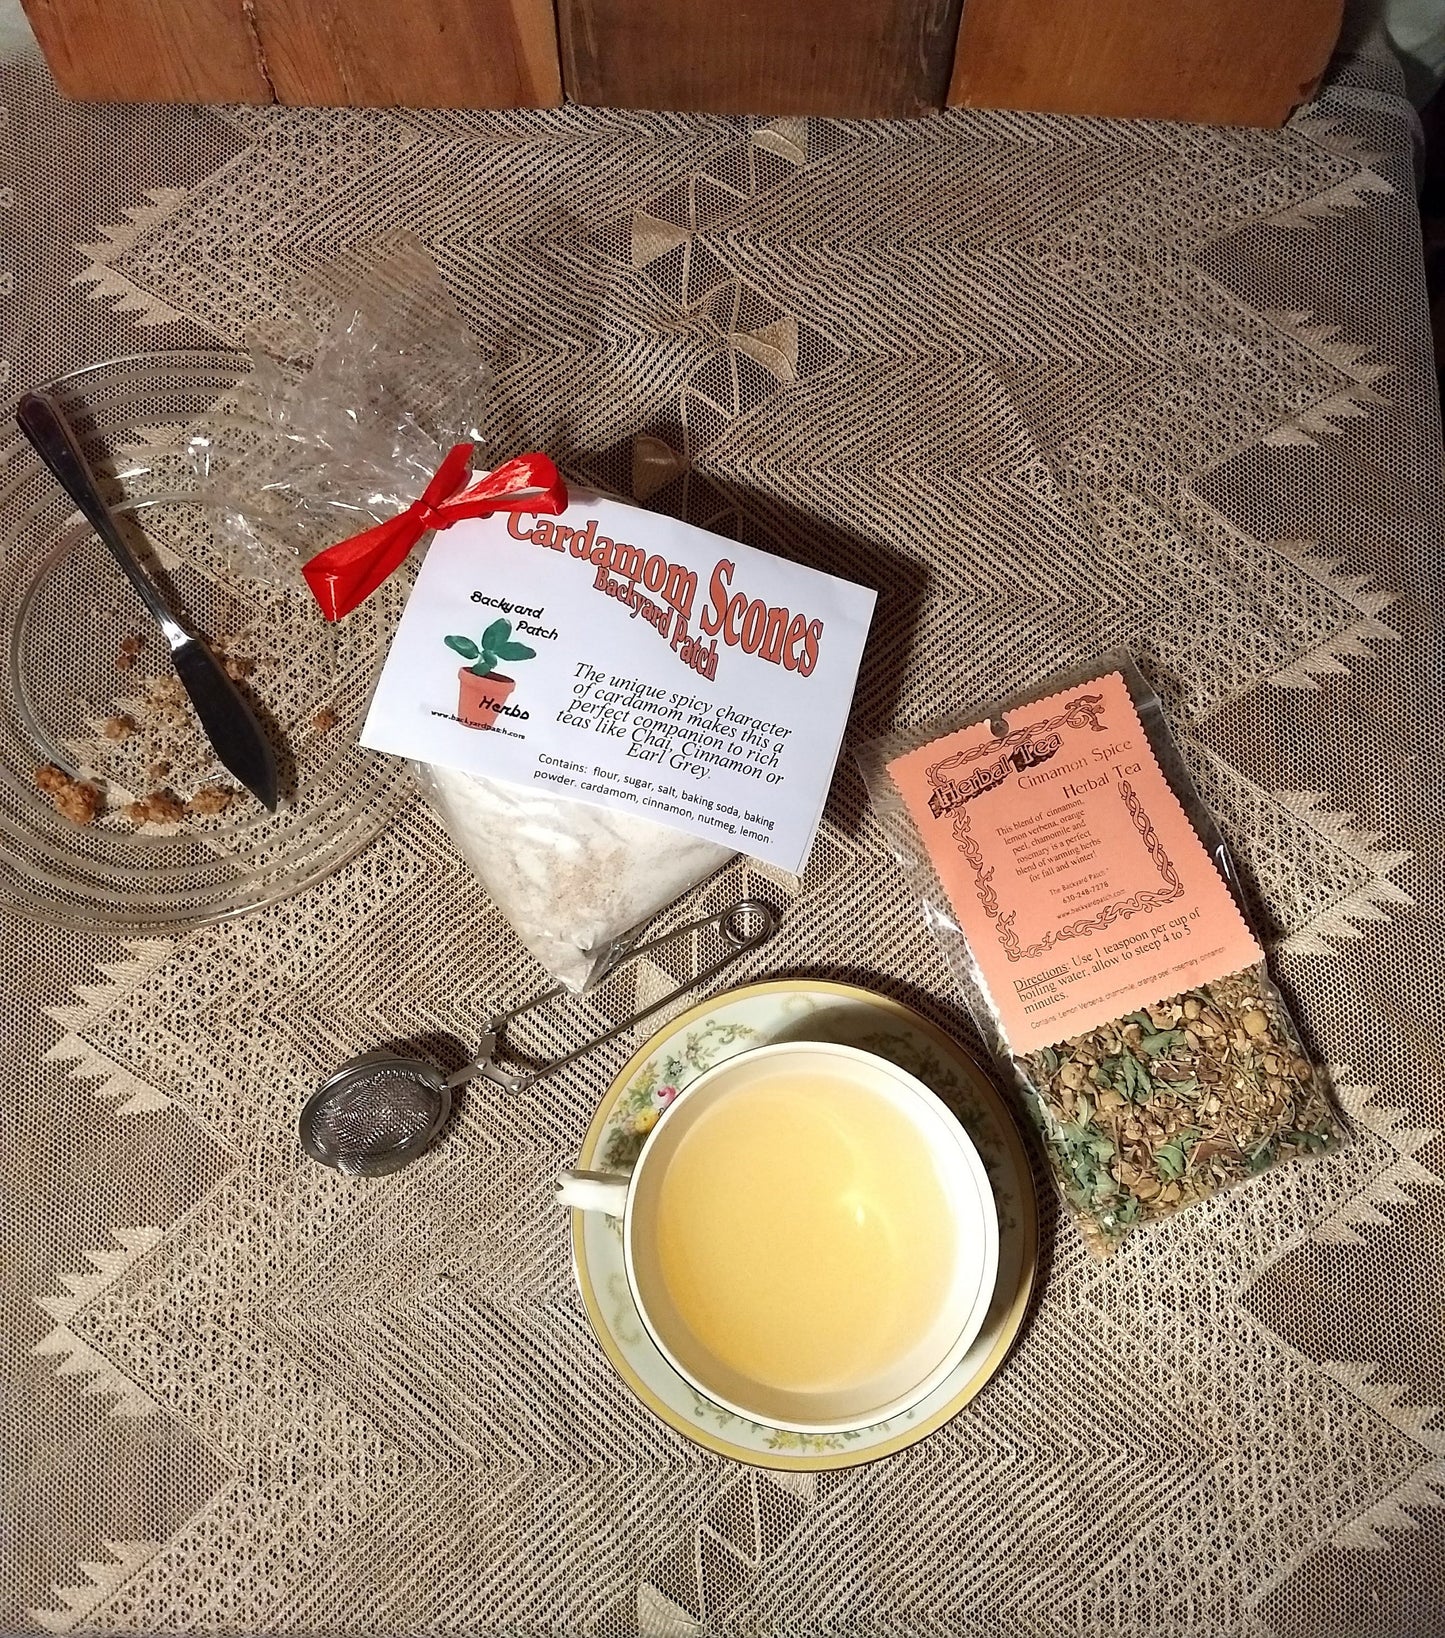 Scone and Tea Gift Package, Cardamom Scones and Cinnamon Spice Herb Tea, Caffeine-Free